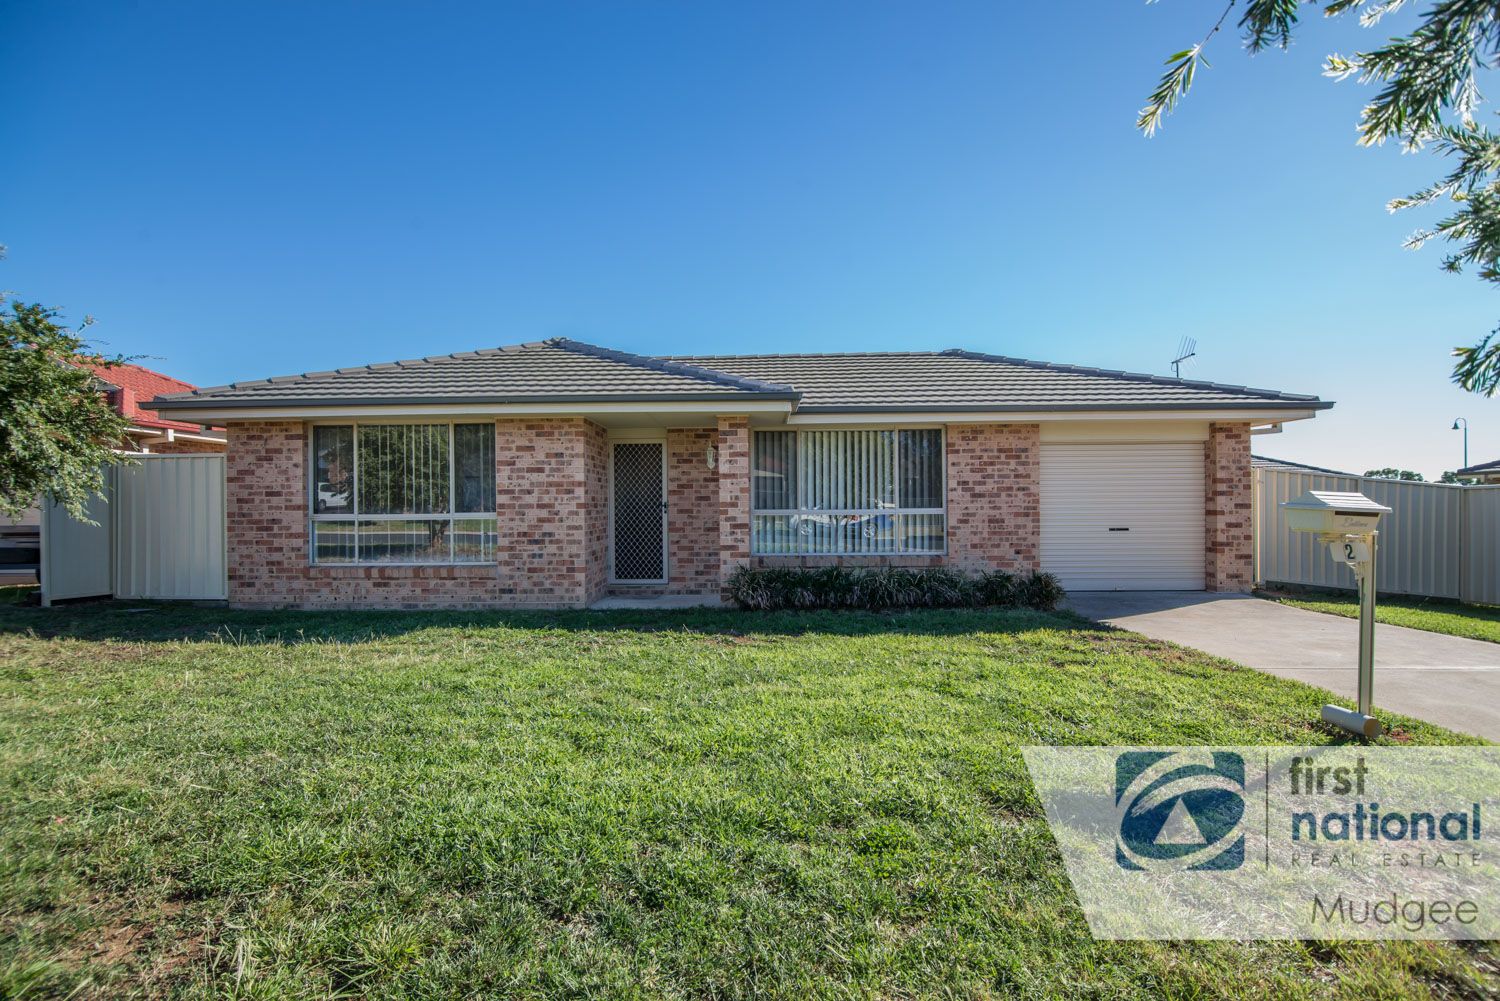 3 bedrooms House in 2 Hardy Crescent MUDGEE NSW, 2850